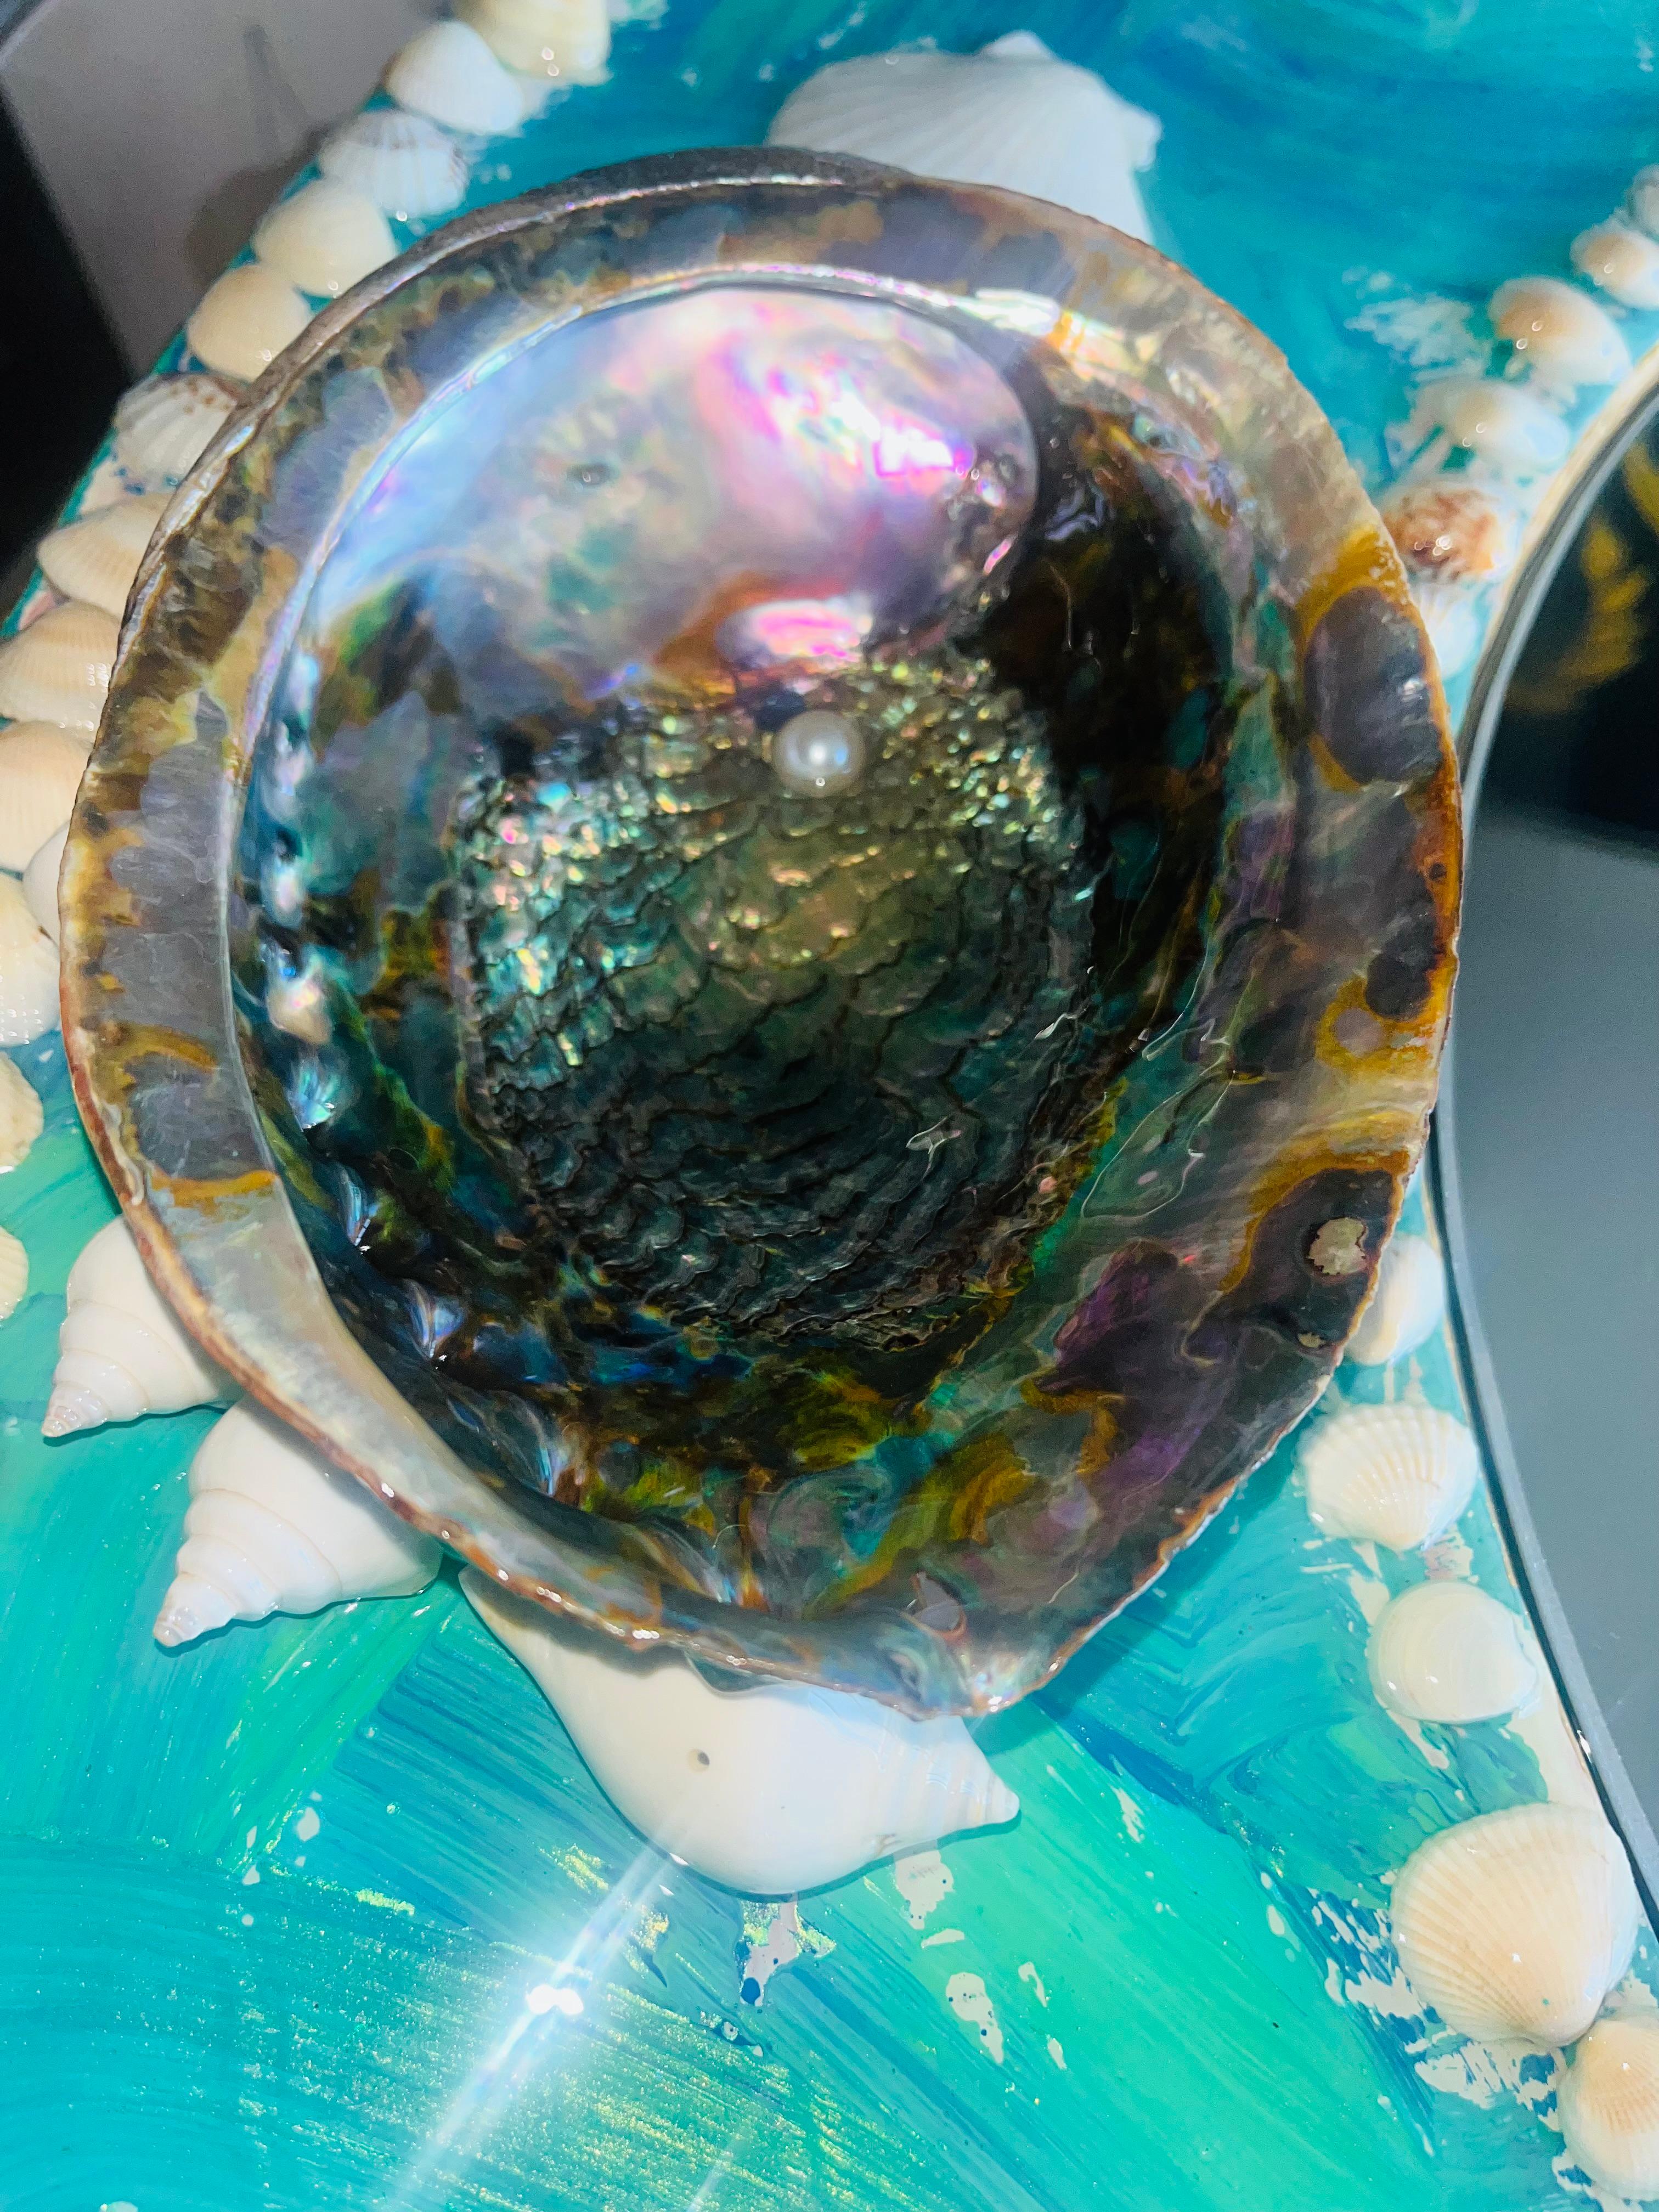                  **ANNUAL SUPER SALE TIL APRIL 25th ONLY**
*This Price Won't Be Repeated Again This Year - Take Advantage Of It*

One of a kind seashells encrusted round mirror.

There are many seashells encrusted mirrors but this one is the only